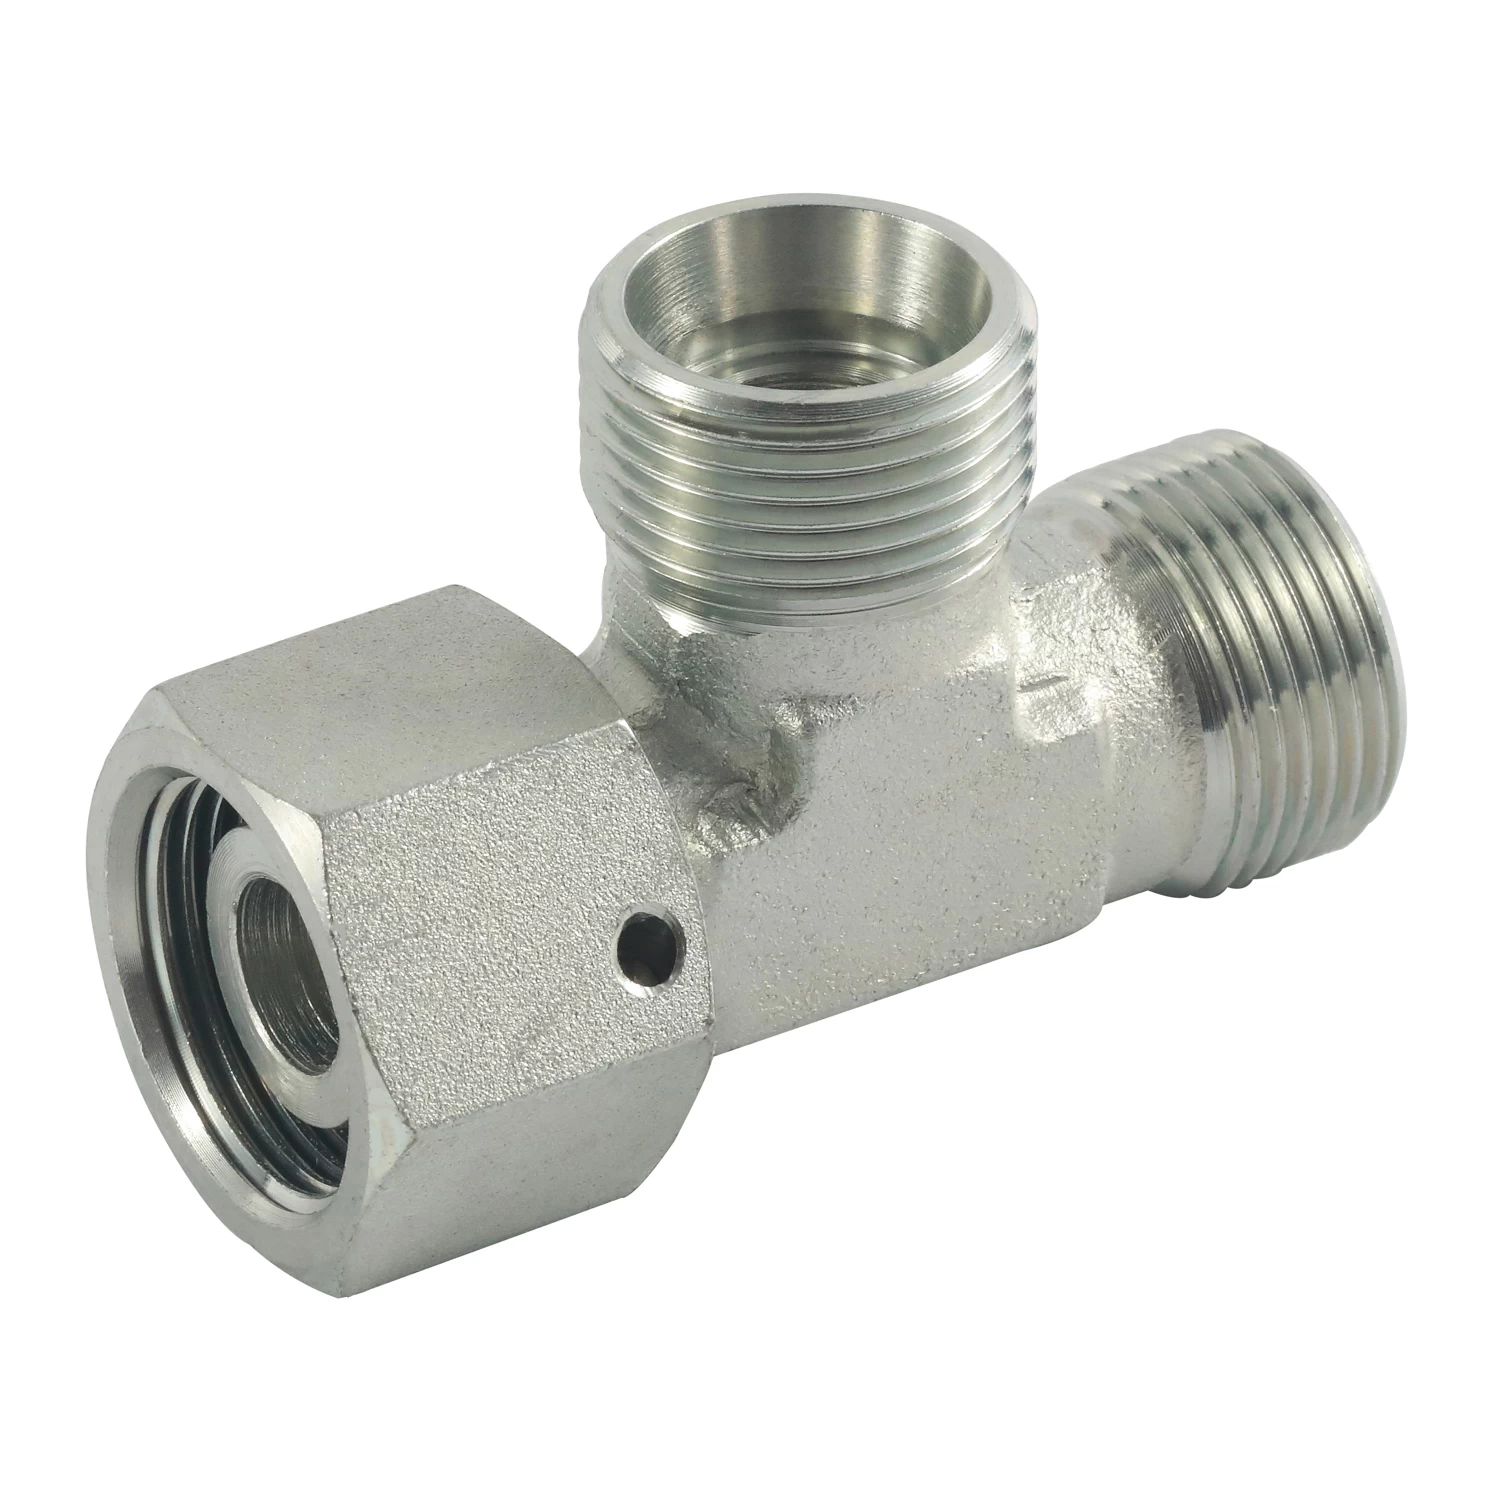 China CC run tee fittings with swivel nut tube fittings manufacturer